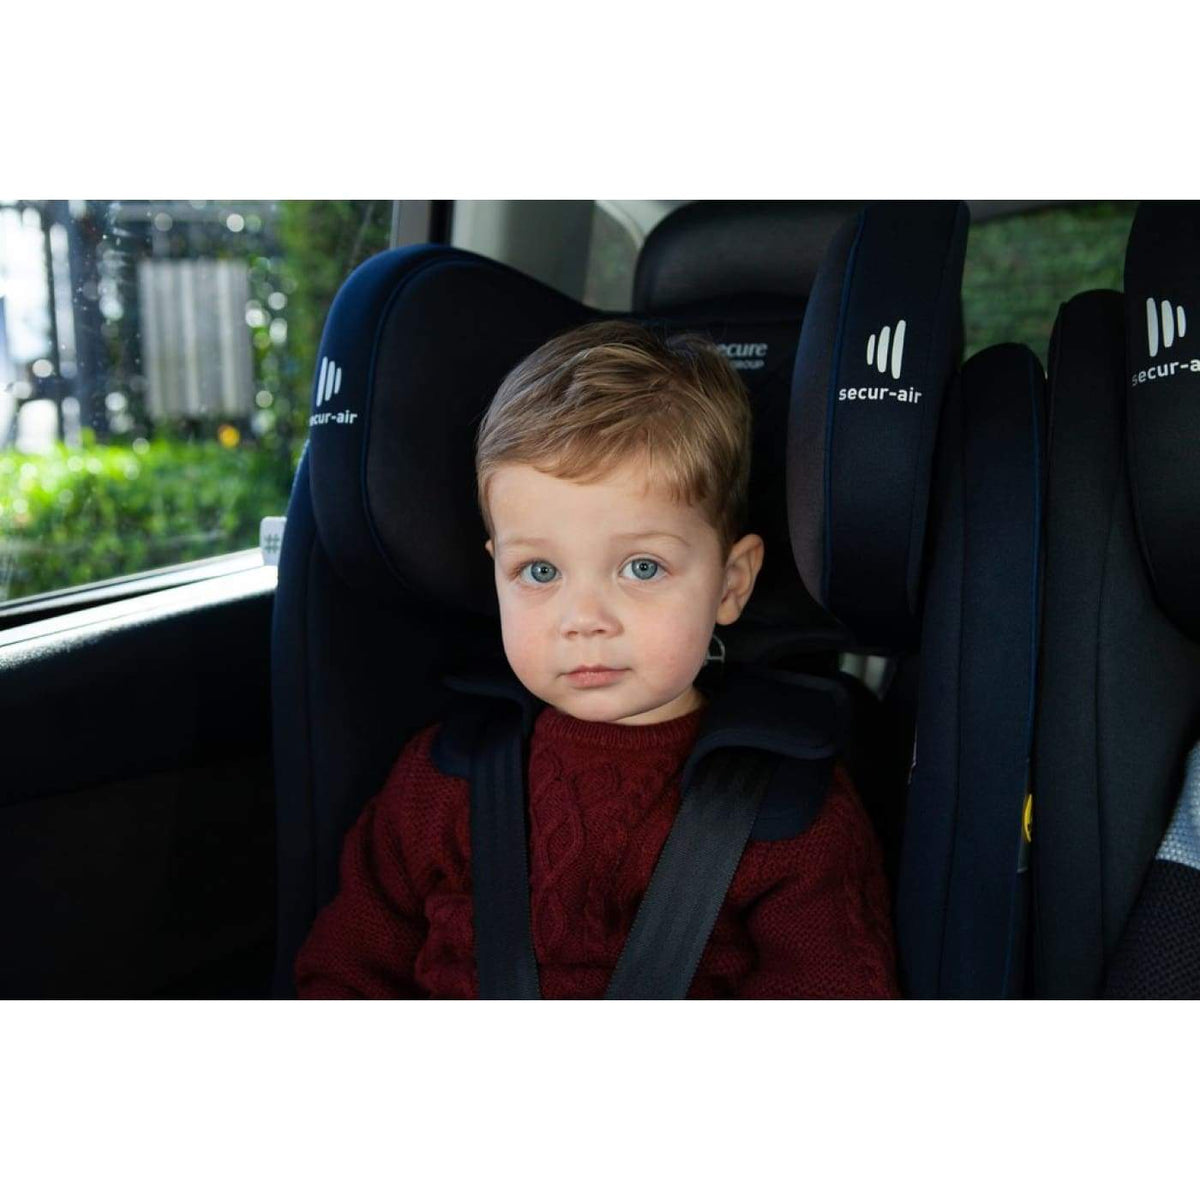 Infasecure Attain Premium More Convertible Car Seat Isofix - Midnight Blue 0-4YR - Midnight Blue - CAR SEATS - CONV ISOFIX CAR SEATS (0-4YR)